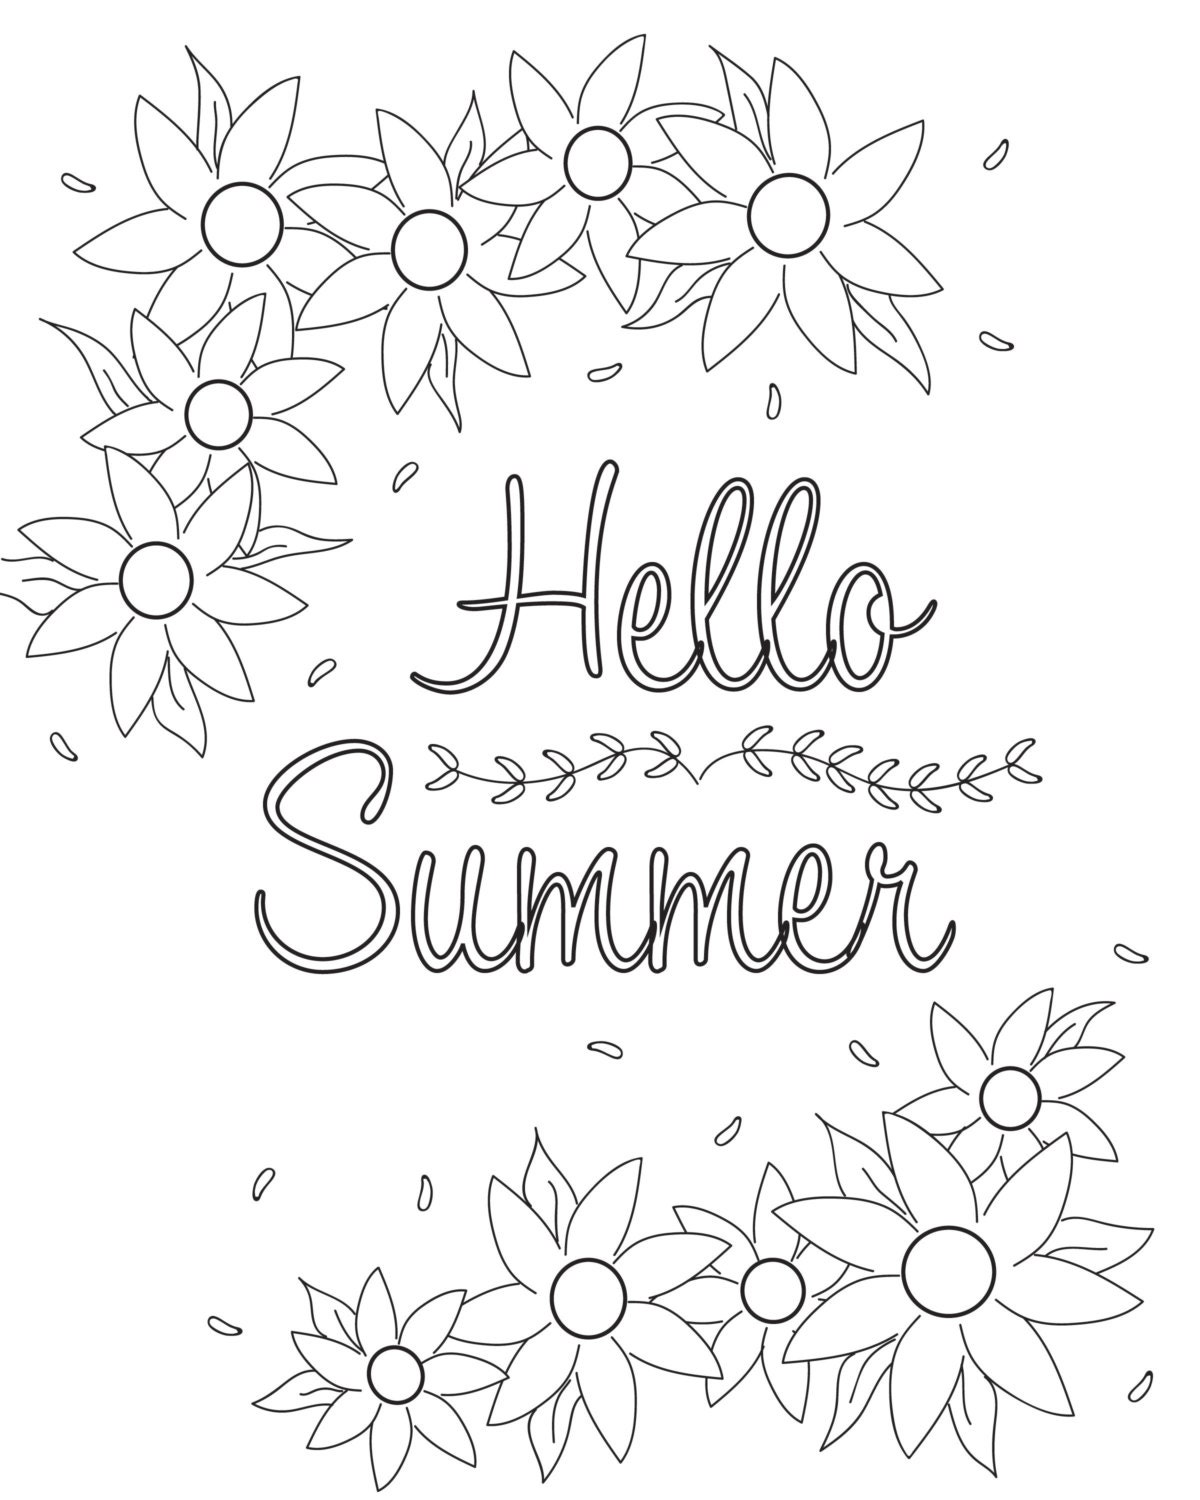 Coloring Page Hello Summer by LovelyHeatherly on Etsy